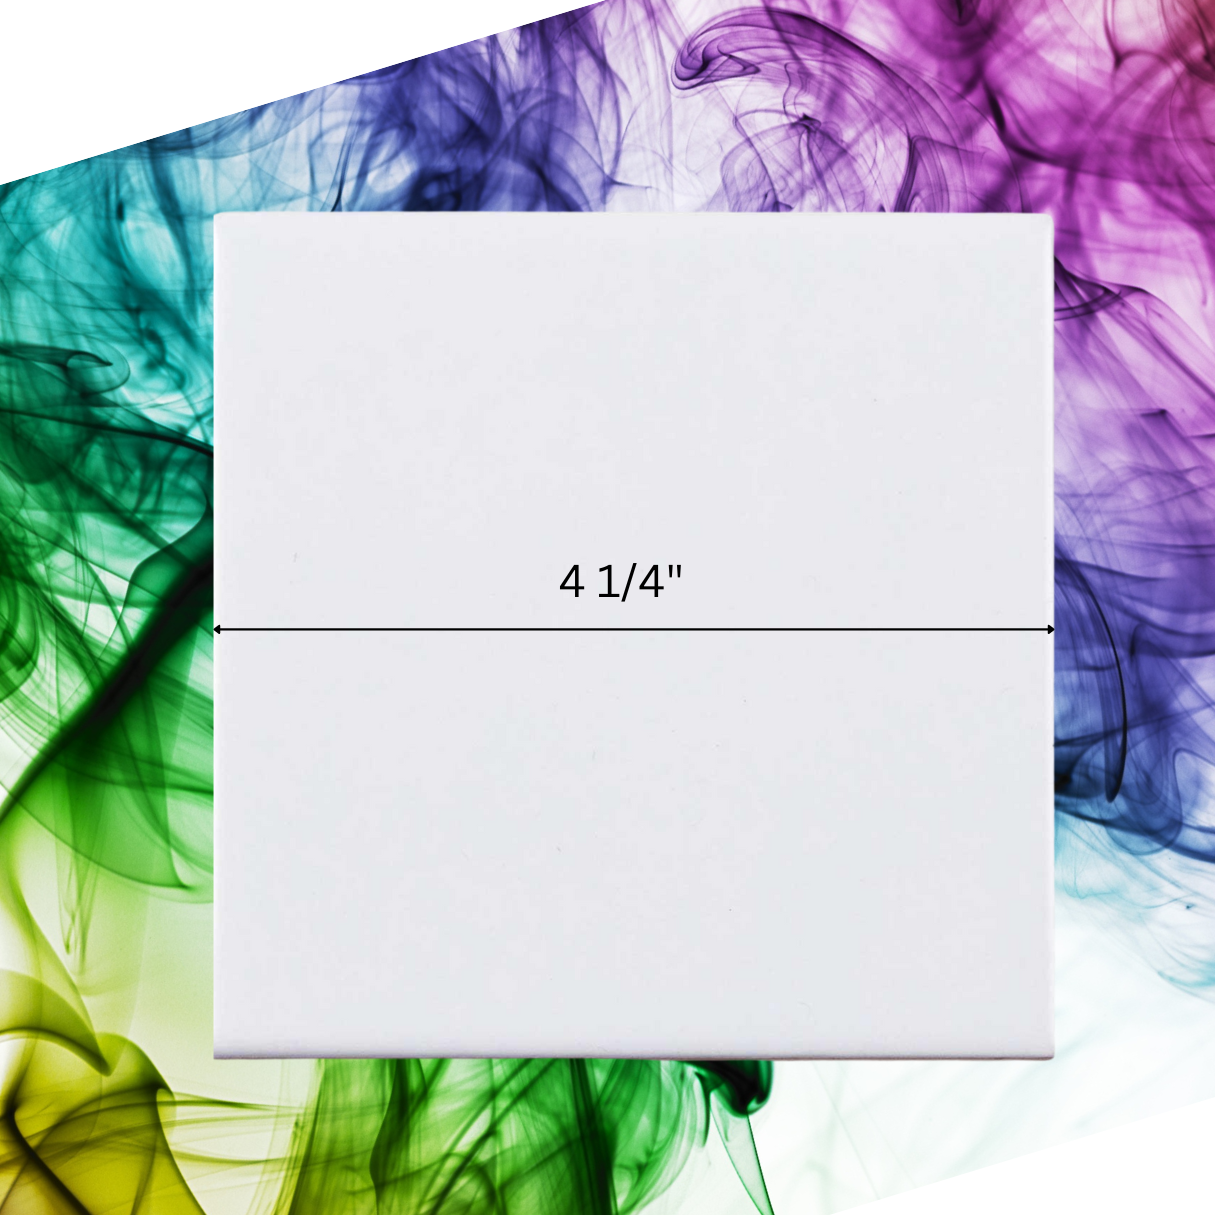 Creative Crafting 12 Pack Glossy White Glazed Ceramic Tile 4x4 for Alcohol Ink Painting, Decorating, Arts & Crafts, 4.25 x 4.25 Inch Square, Ready-to-Paint Ceramics